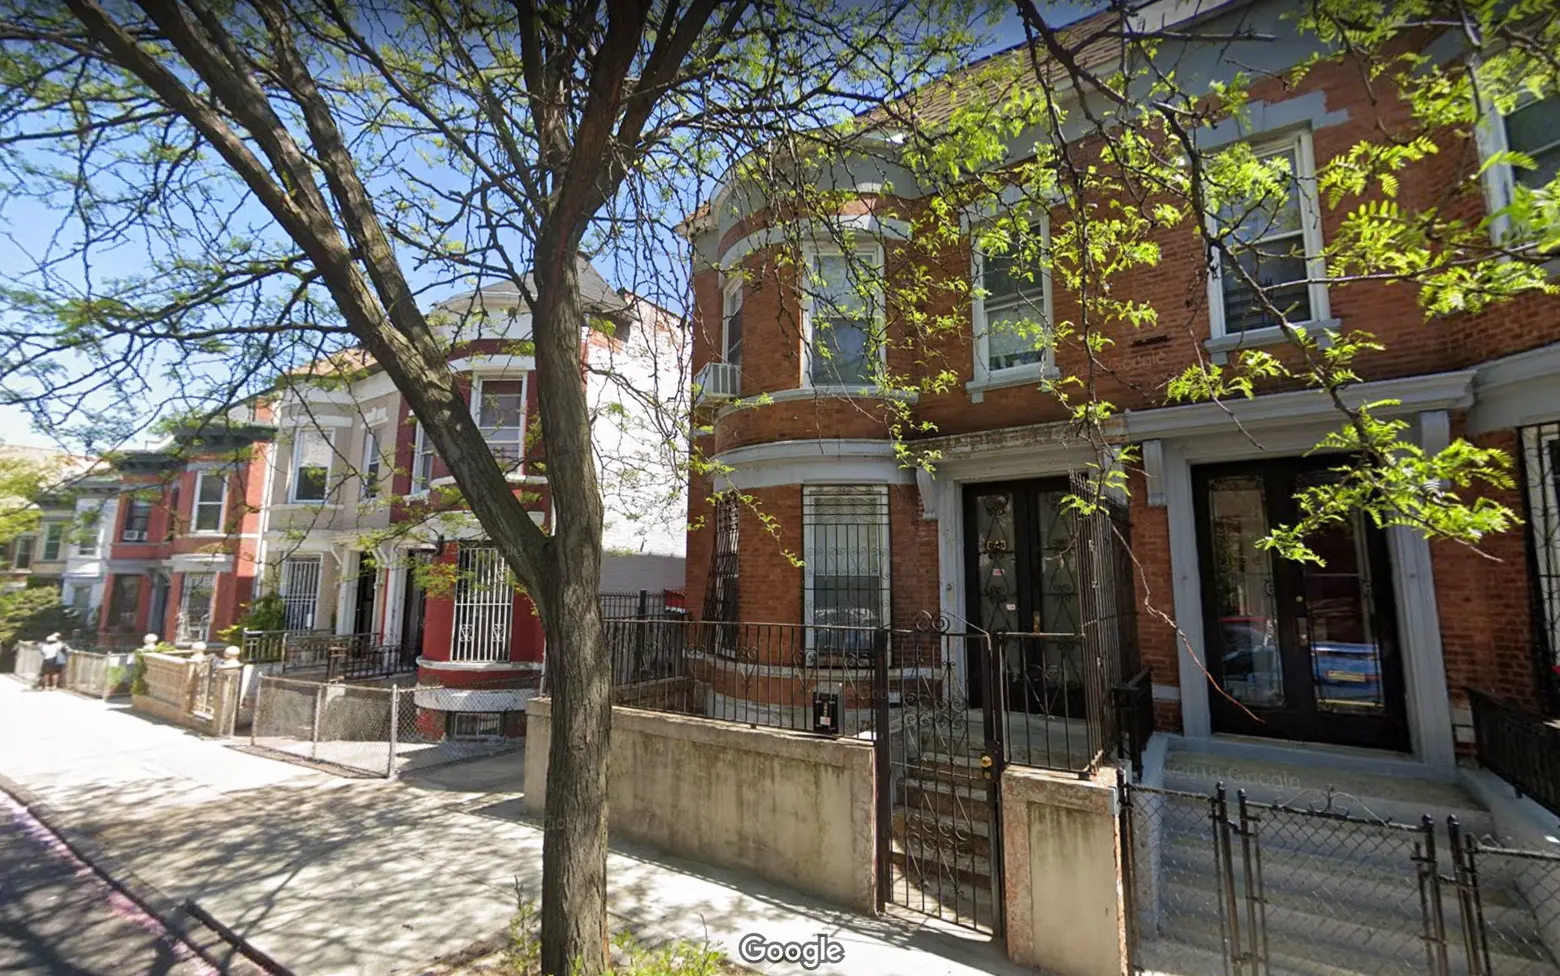 Manida Street in the Bronx becomes NYC’s 150th historic district